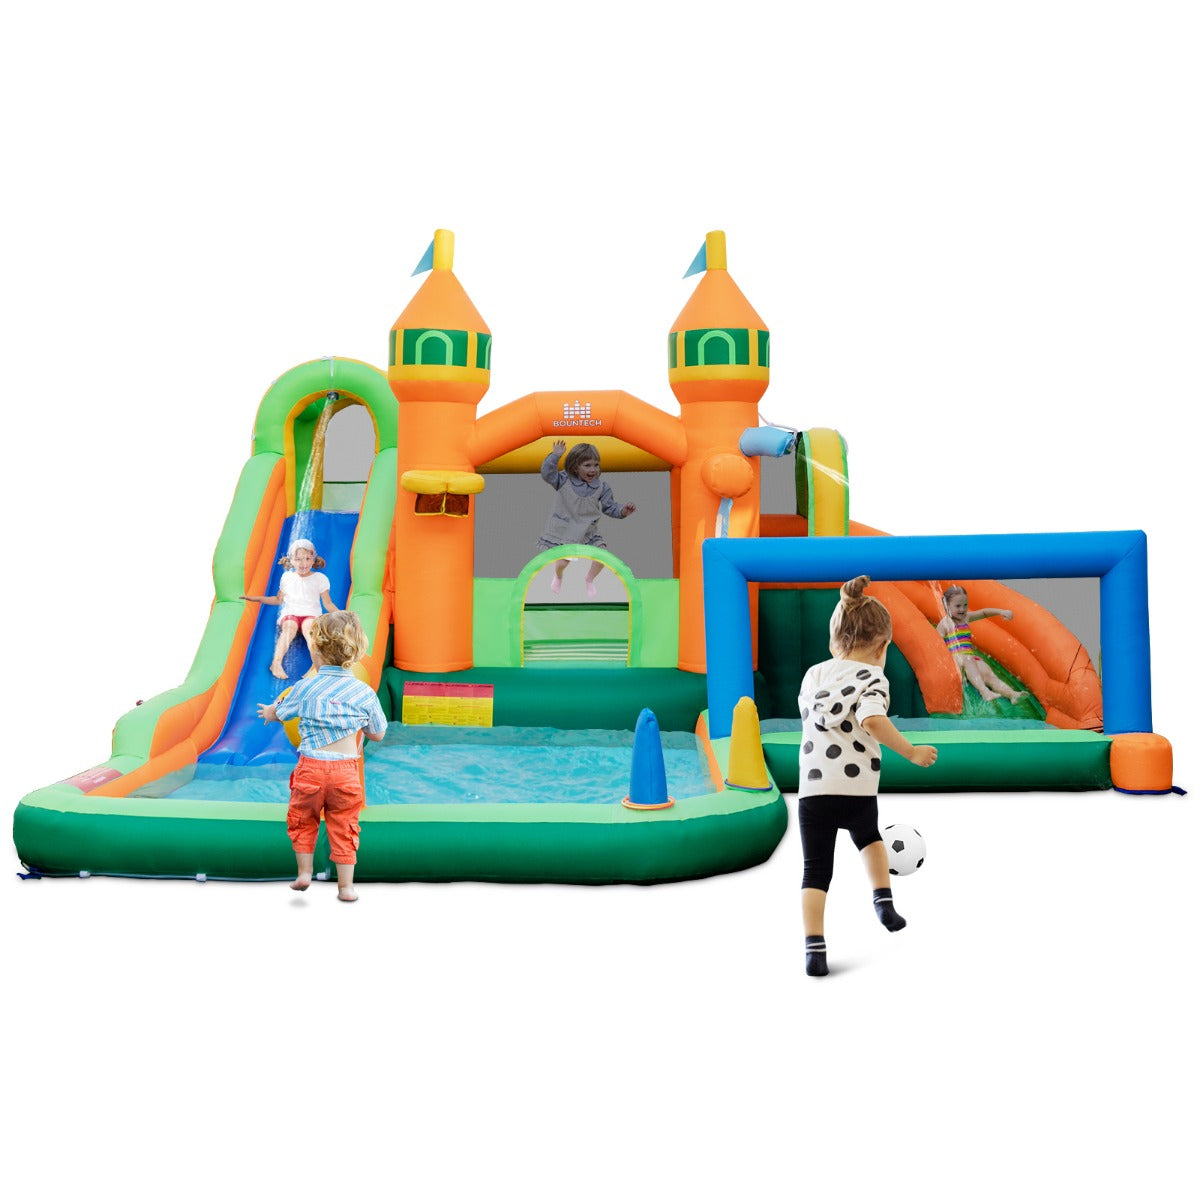 Kids Water Park with Long Slides Splash Pools Climbing Wall for Yard Lawn Without Blower